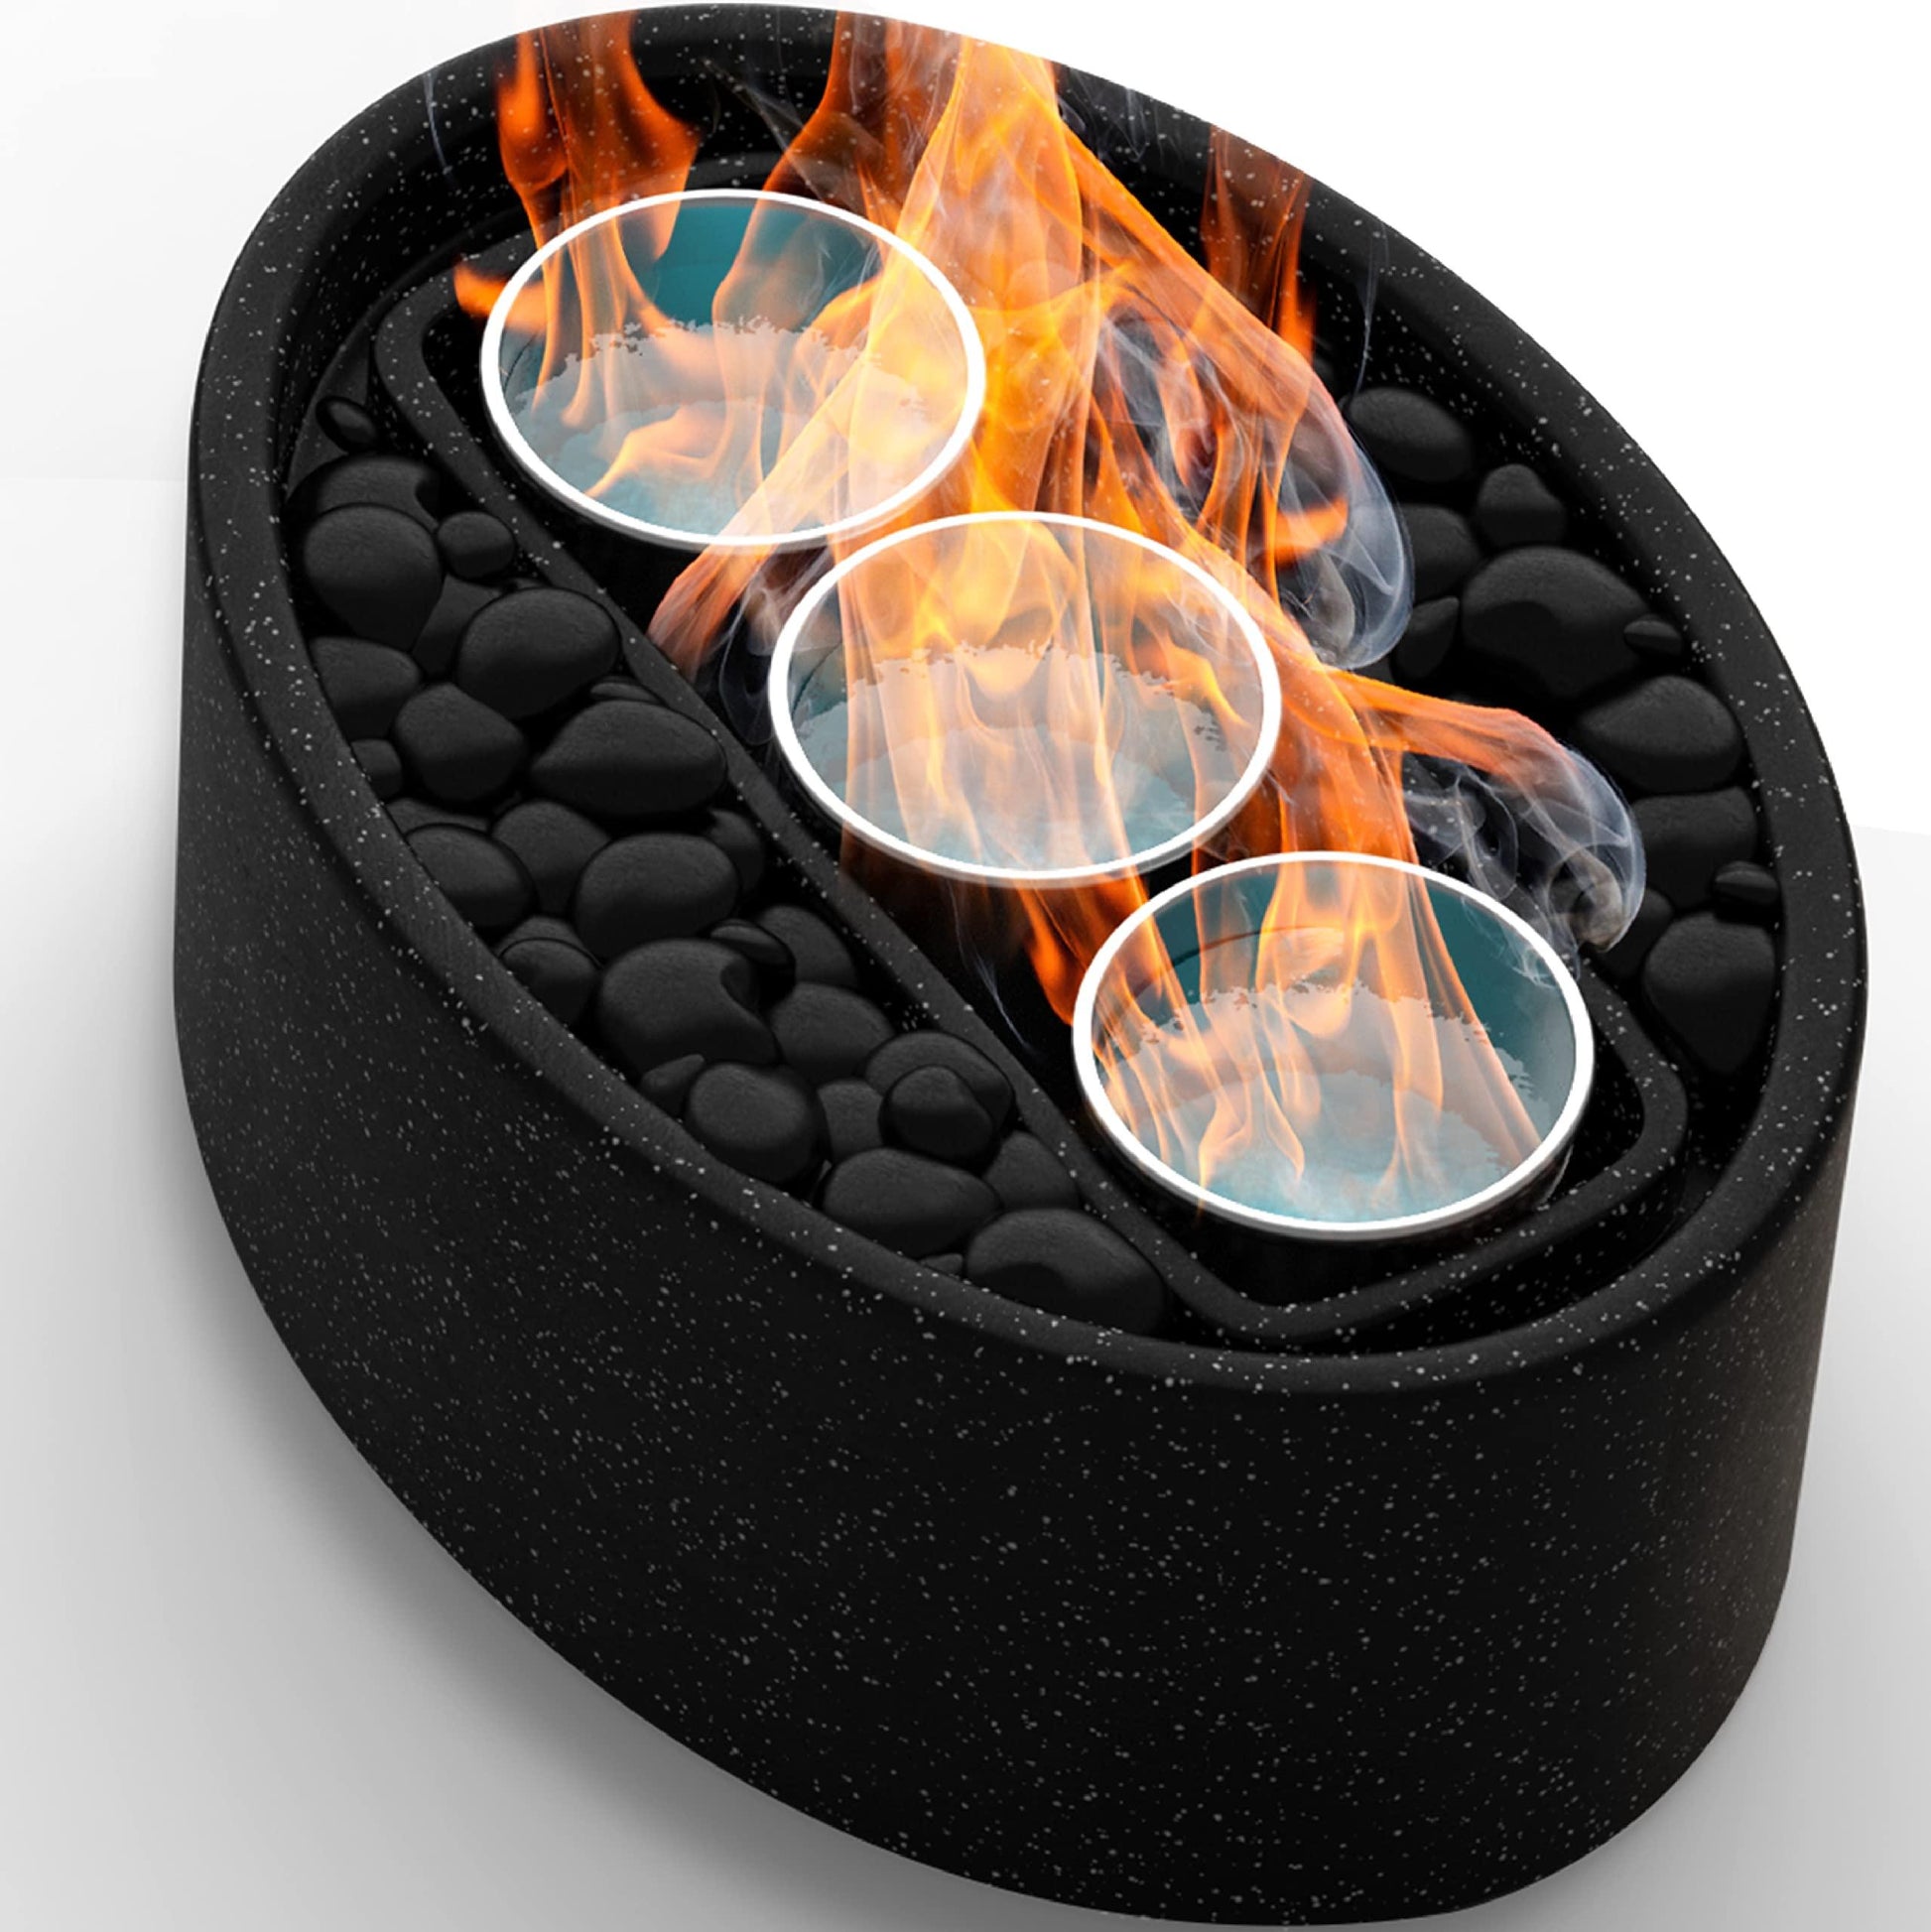 Vizayo Tabletop Fire Pit for Patio - 14.2 x 10.2 inch Indoor Outdoor Table Top Firepit Bowl - Use Gel Fuel Cans, Bioethanol or Isopropyl Alcohol - Tabletop Fireplace for Balcony, Patio Decor - Black - CookCave